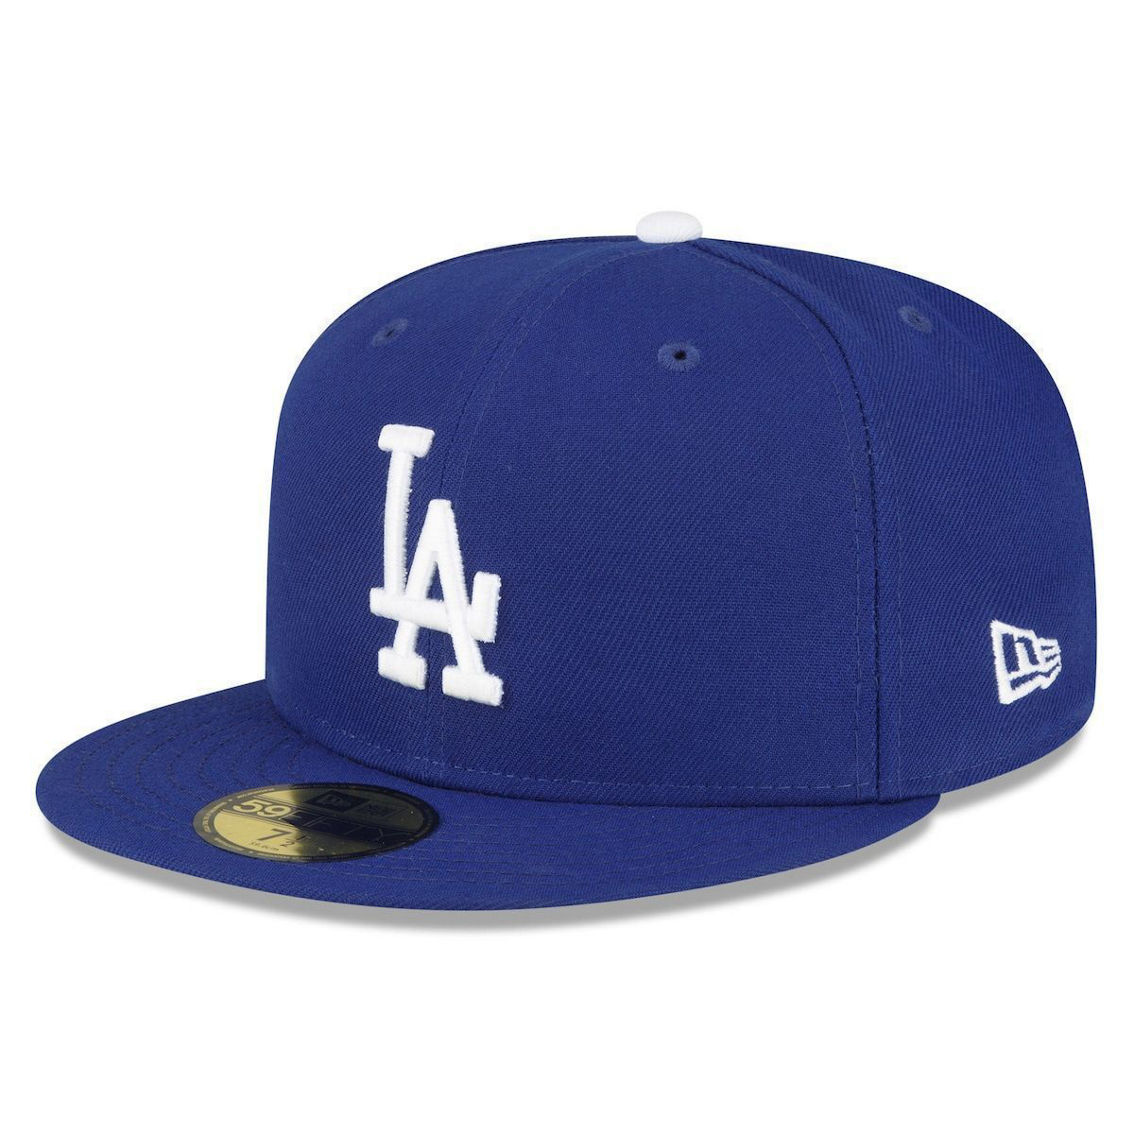 New Era Men's Royal Los Angeles Dodgers Authentic Collection Replica 59FIFTY Fitted Hat - Image 2 of 4